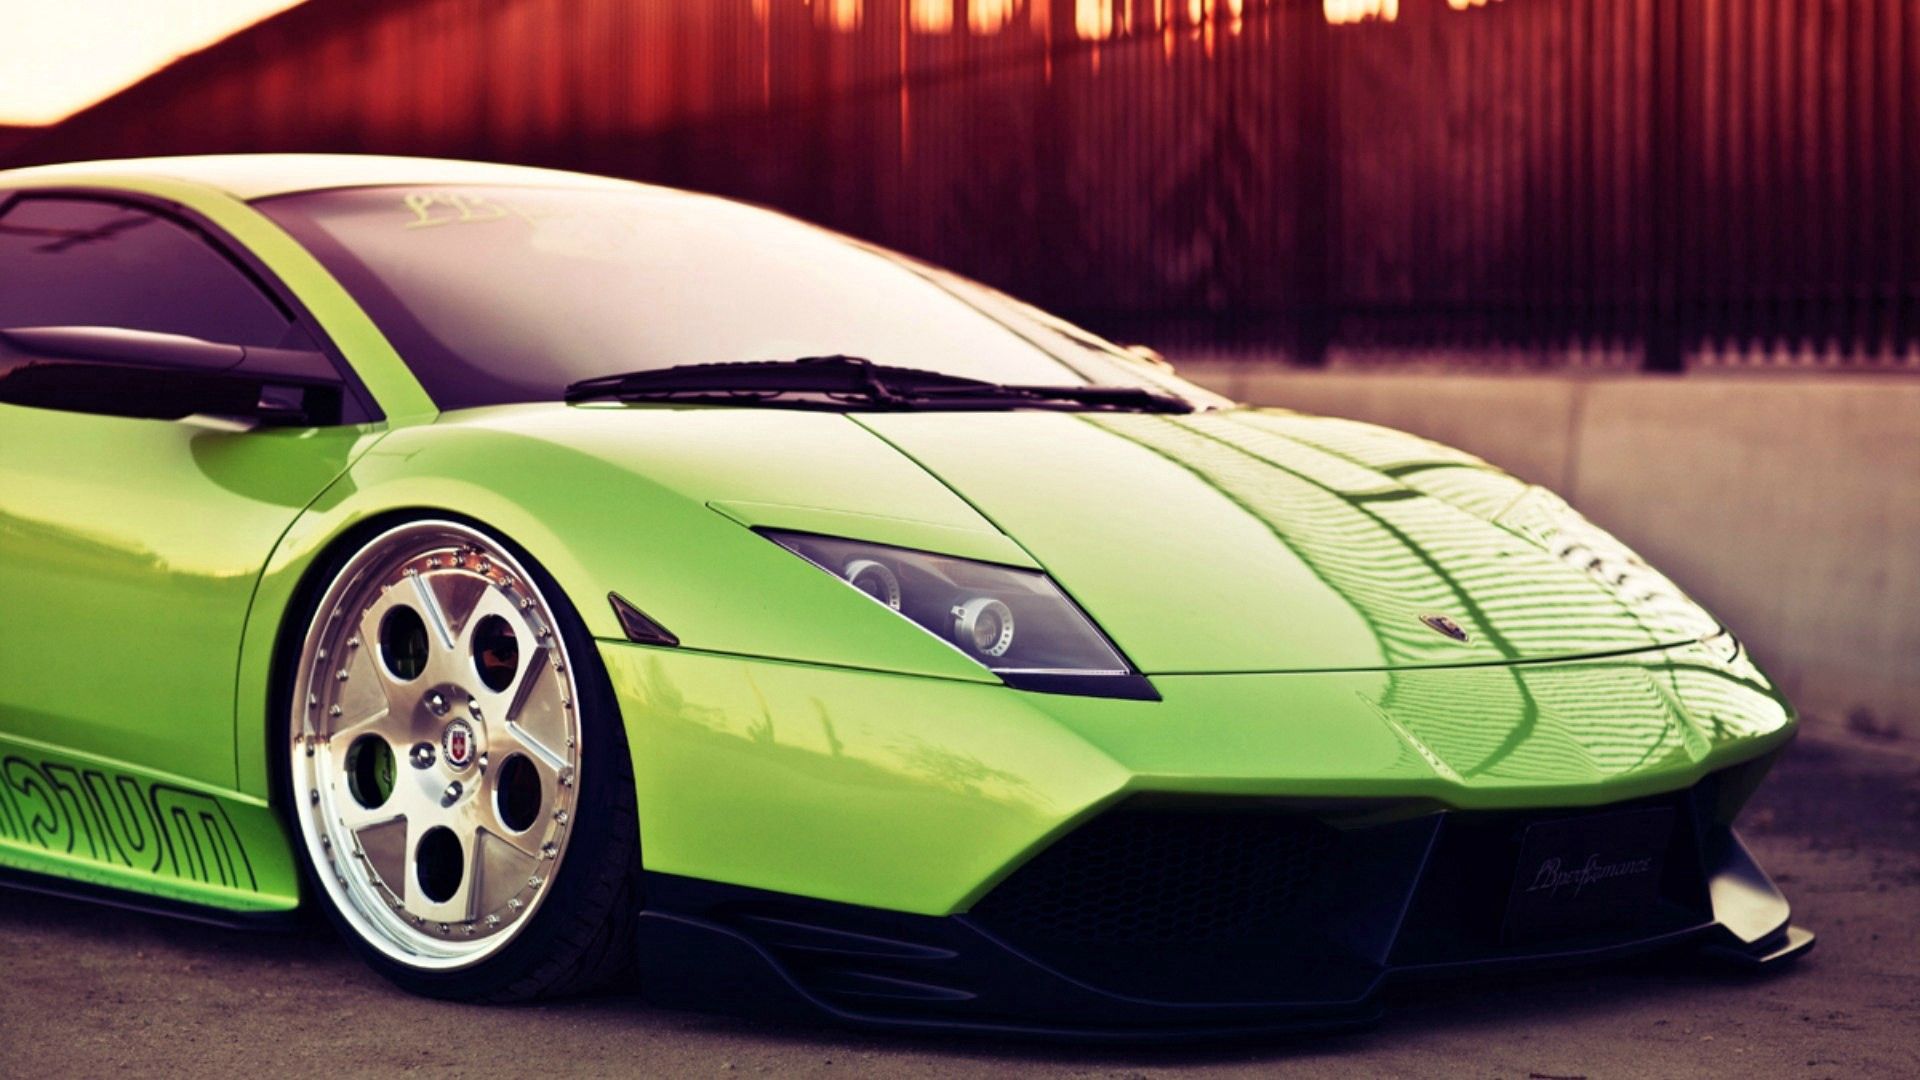 157555 free download Green wallpapers for phone, side view, lamborghini, auto, cars Green images and screensavers for mobile